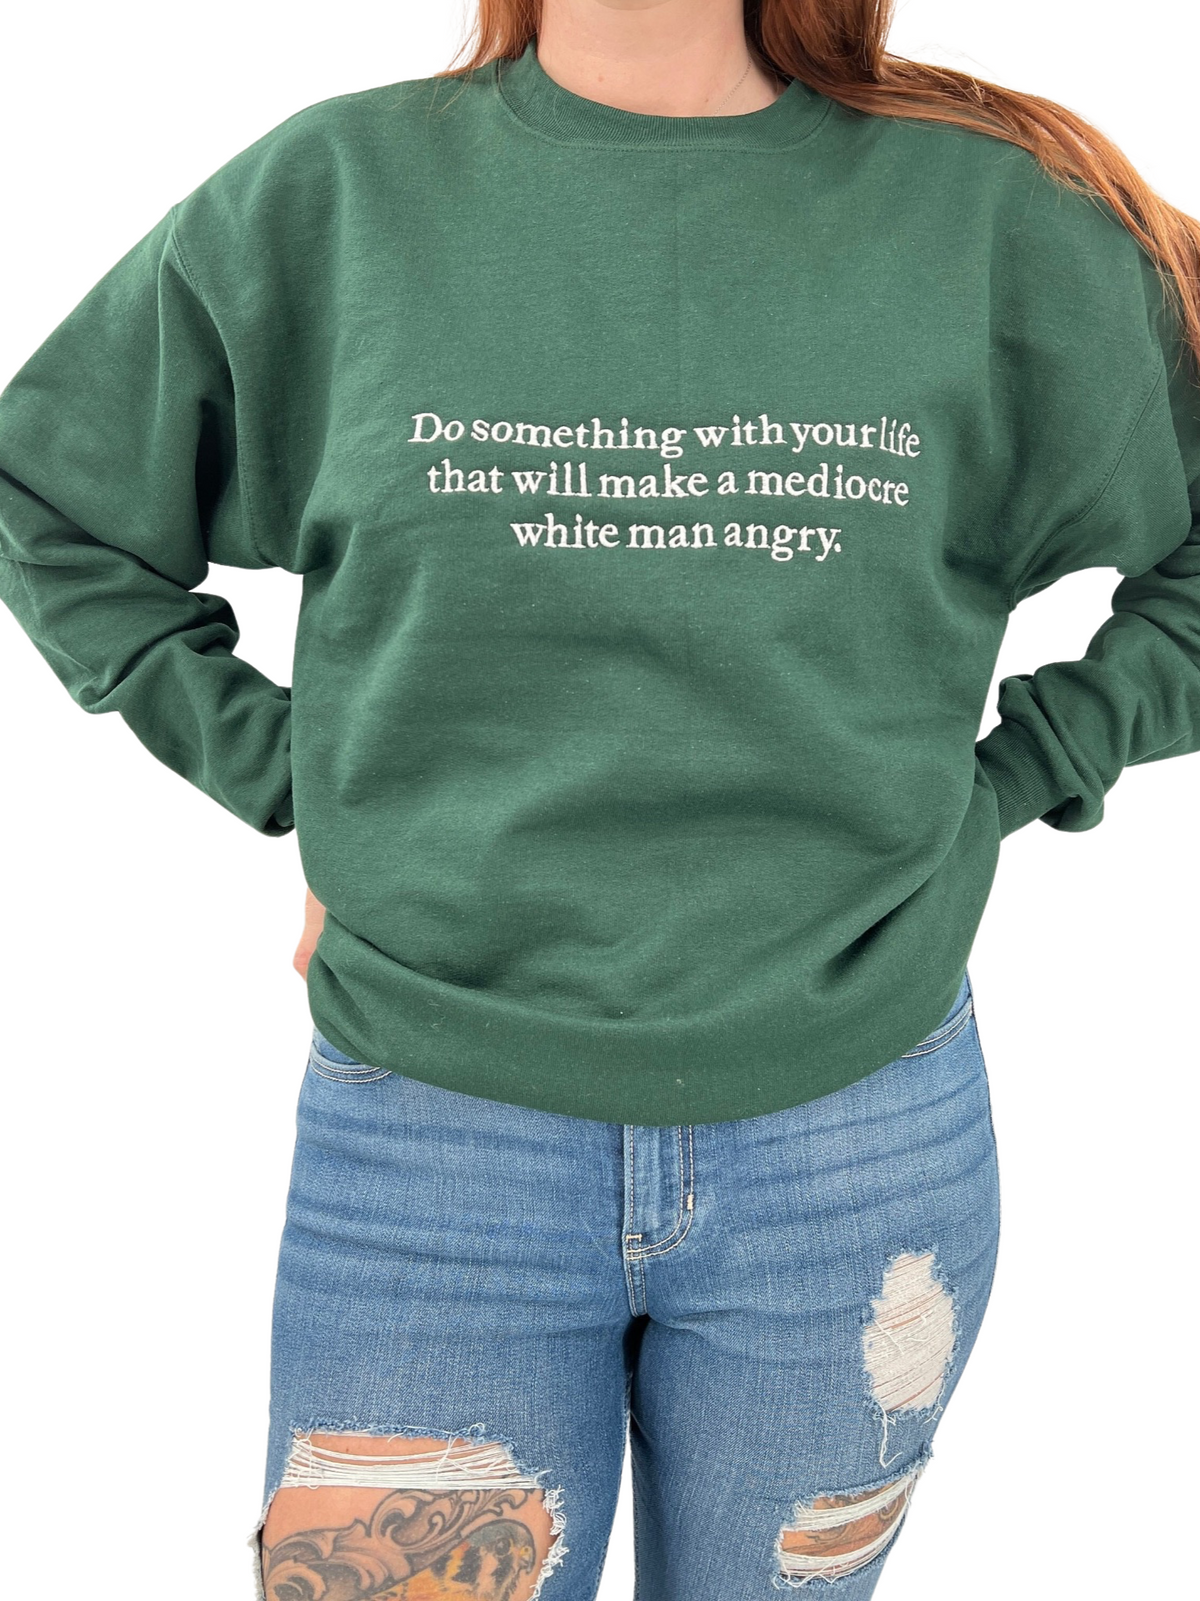 Do Something With Your Life That Will Make a Mediocre White Man Angry T-Shirt or Crewneck